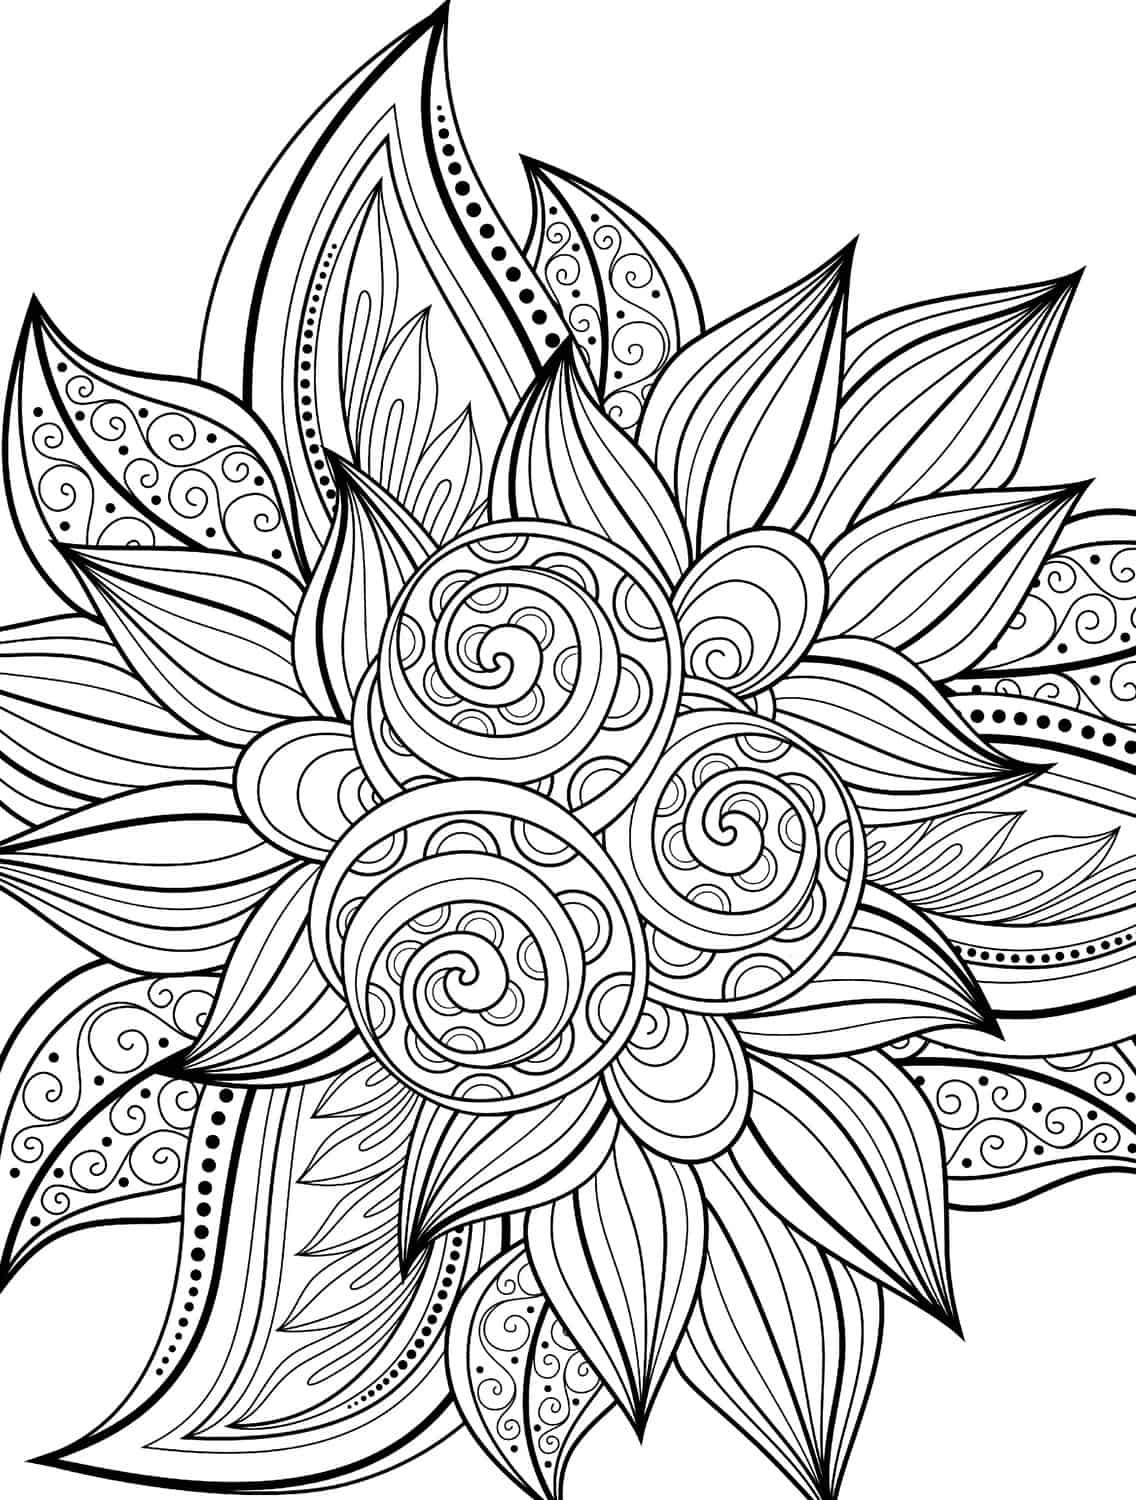 Adult Coloring Book Pages Free
 10 Free Printable Holiday Adult Coloring Pages